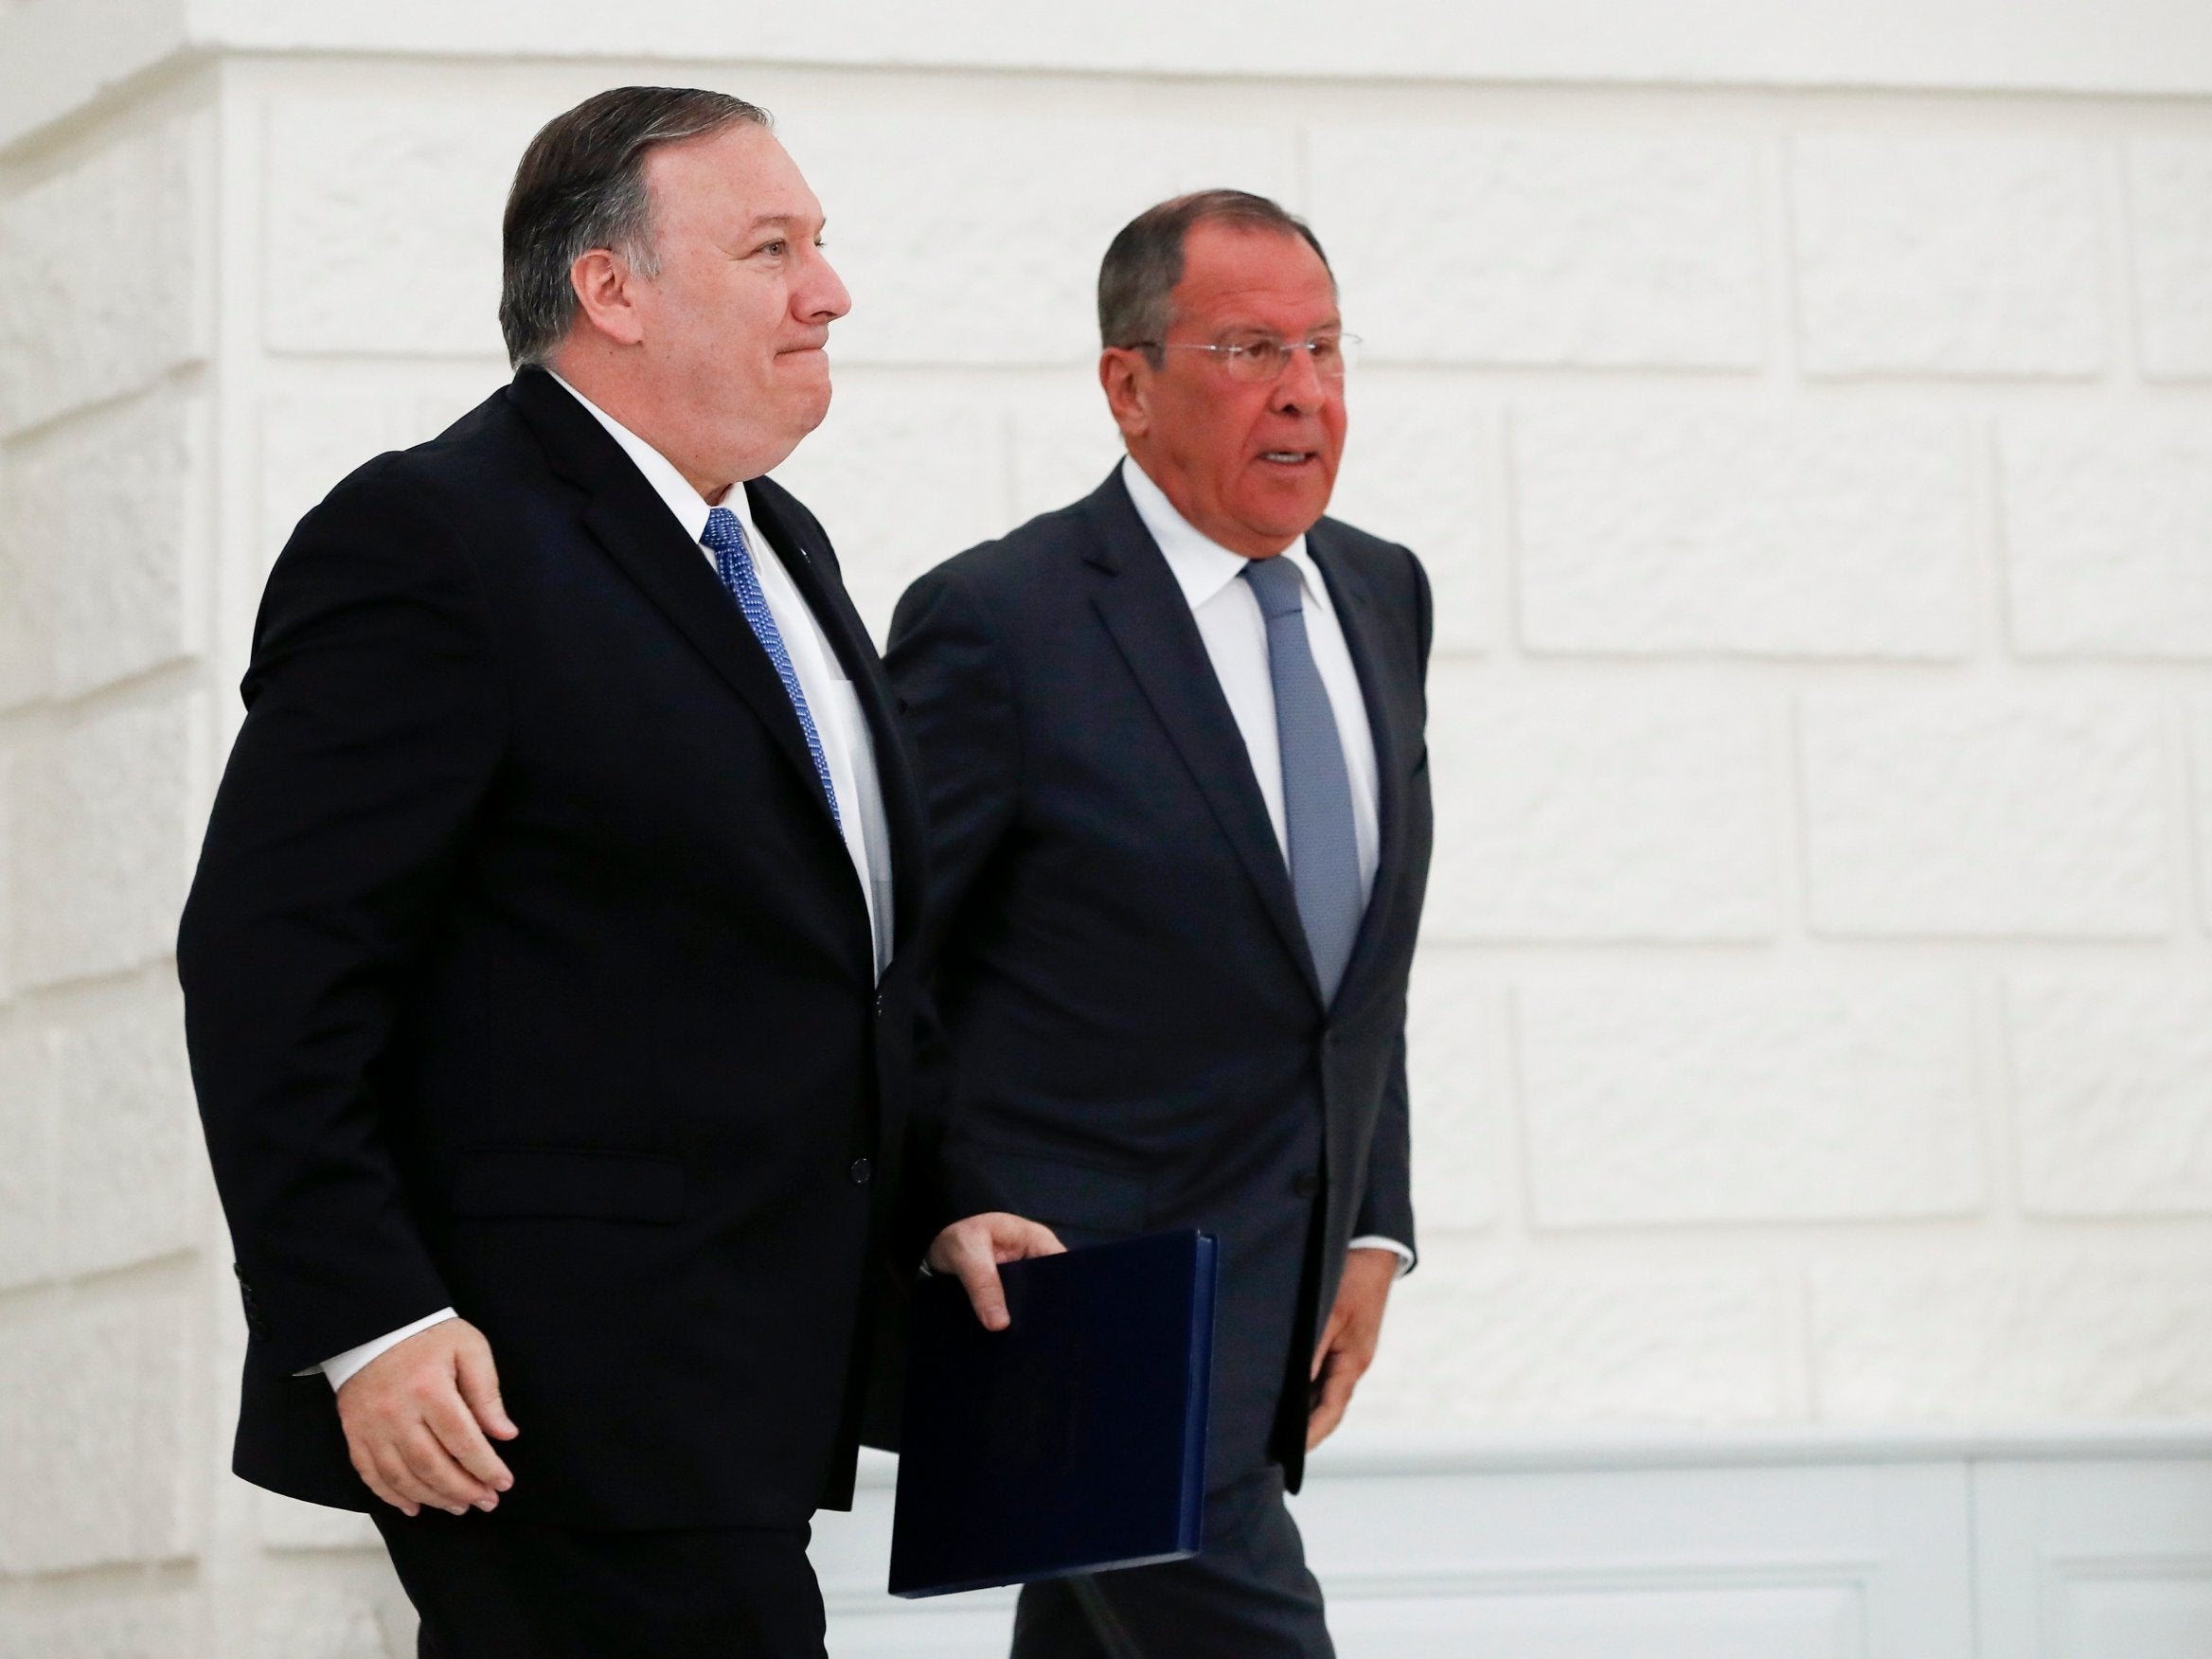 Mike Pompeo and Sergei Lavrov leave after their joint news conference following talks in the Black Sea resort city of Sochi